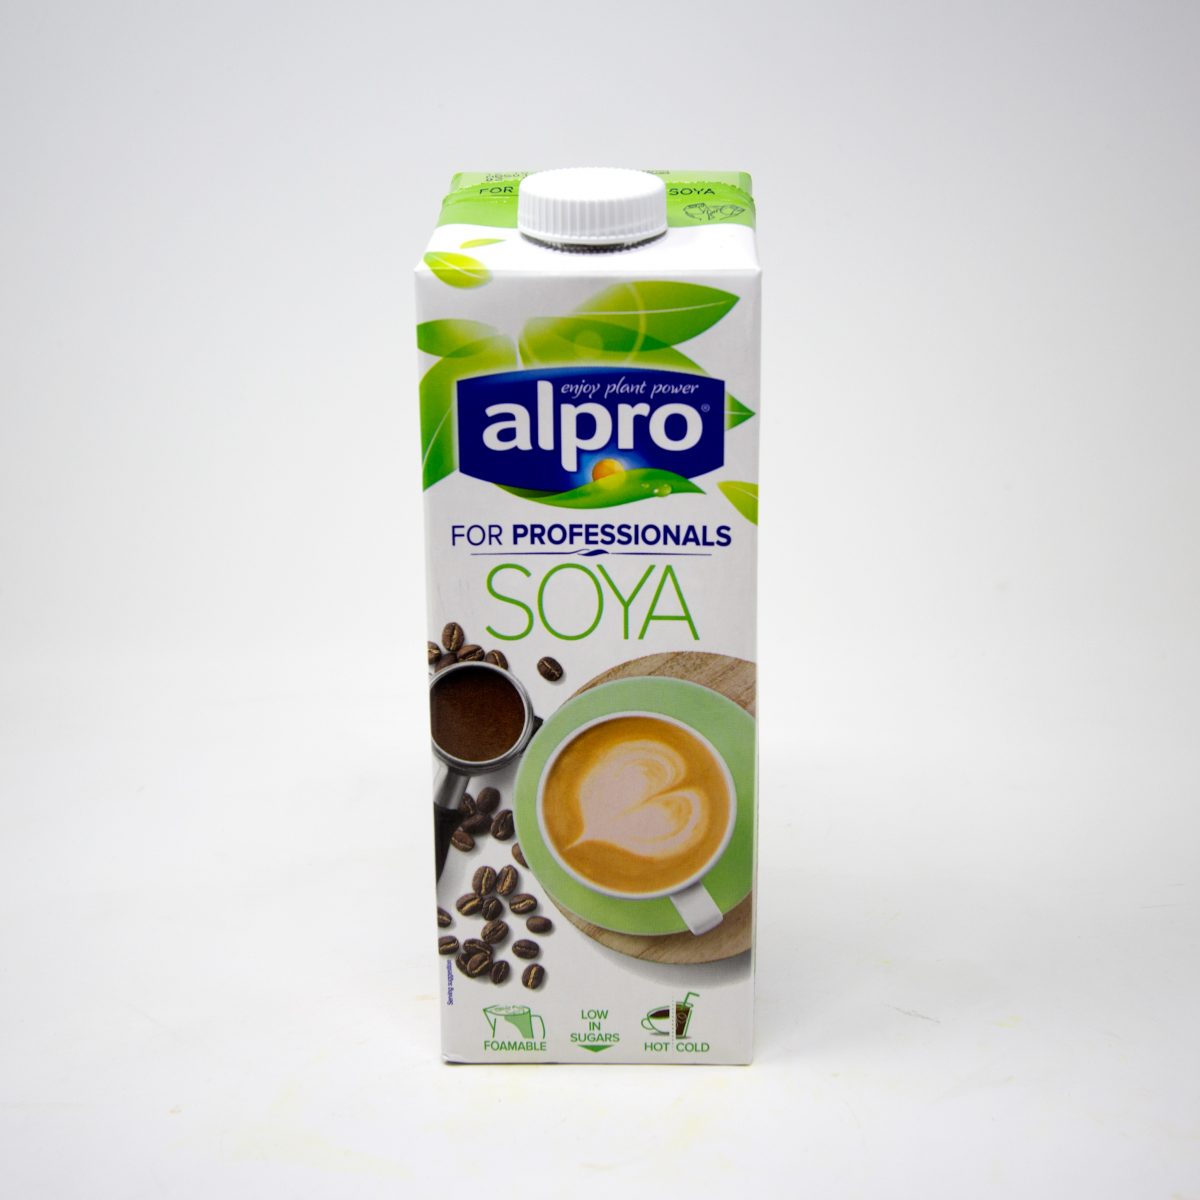 Alpro-Soya-for-Professionals